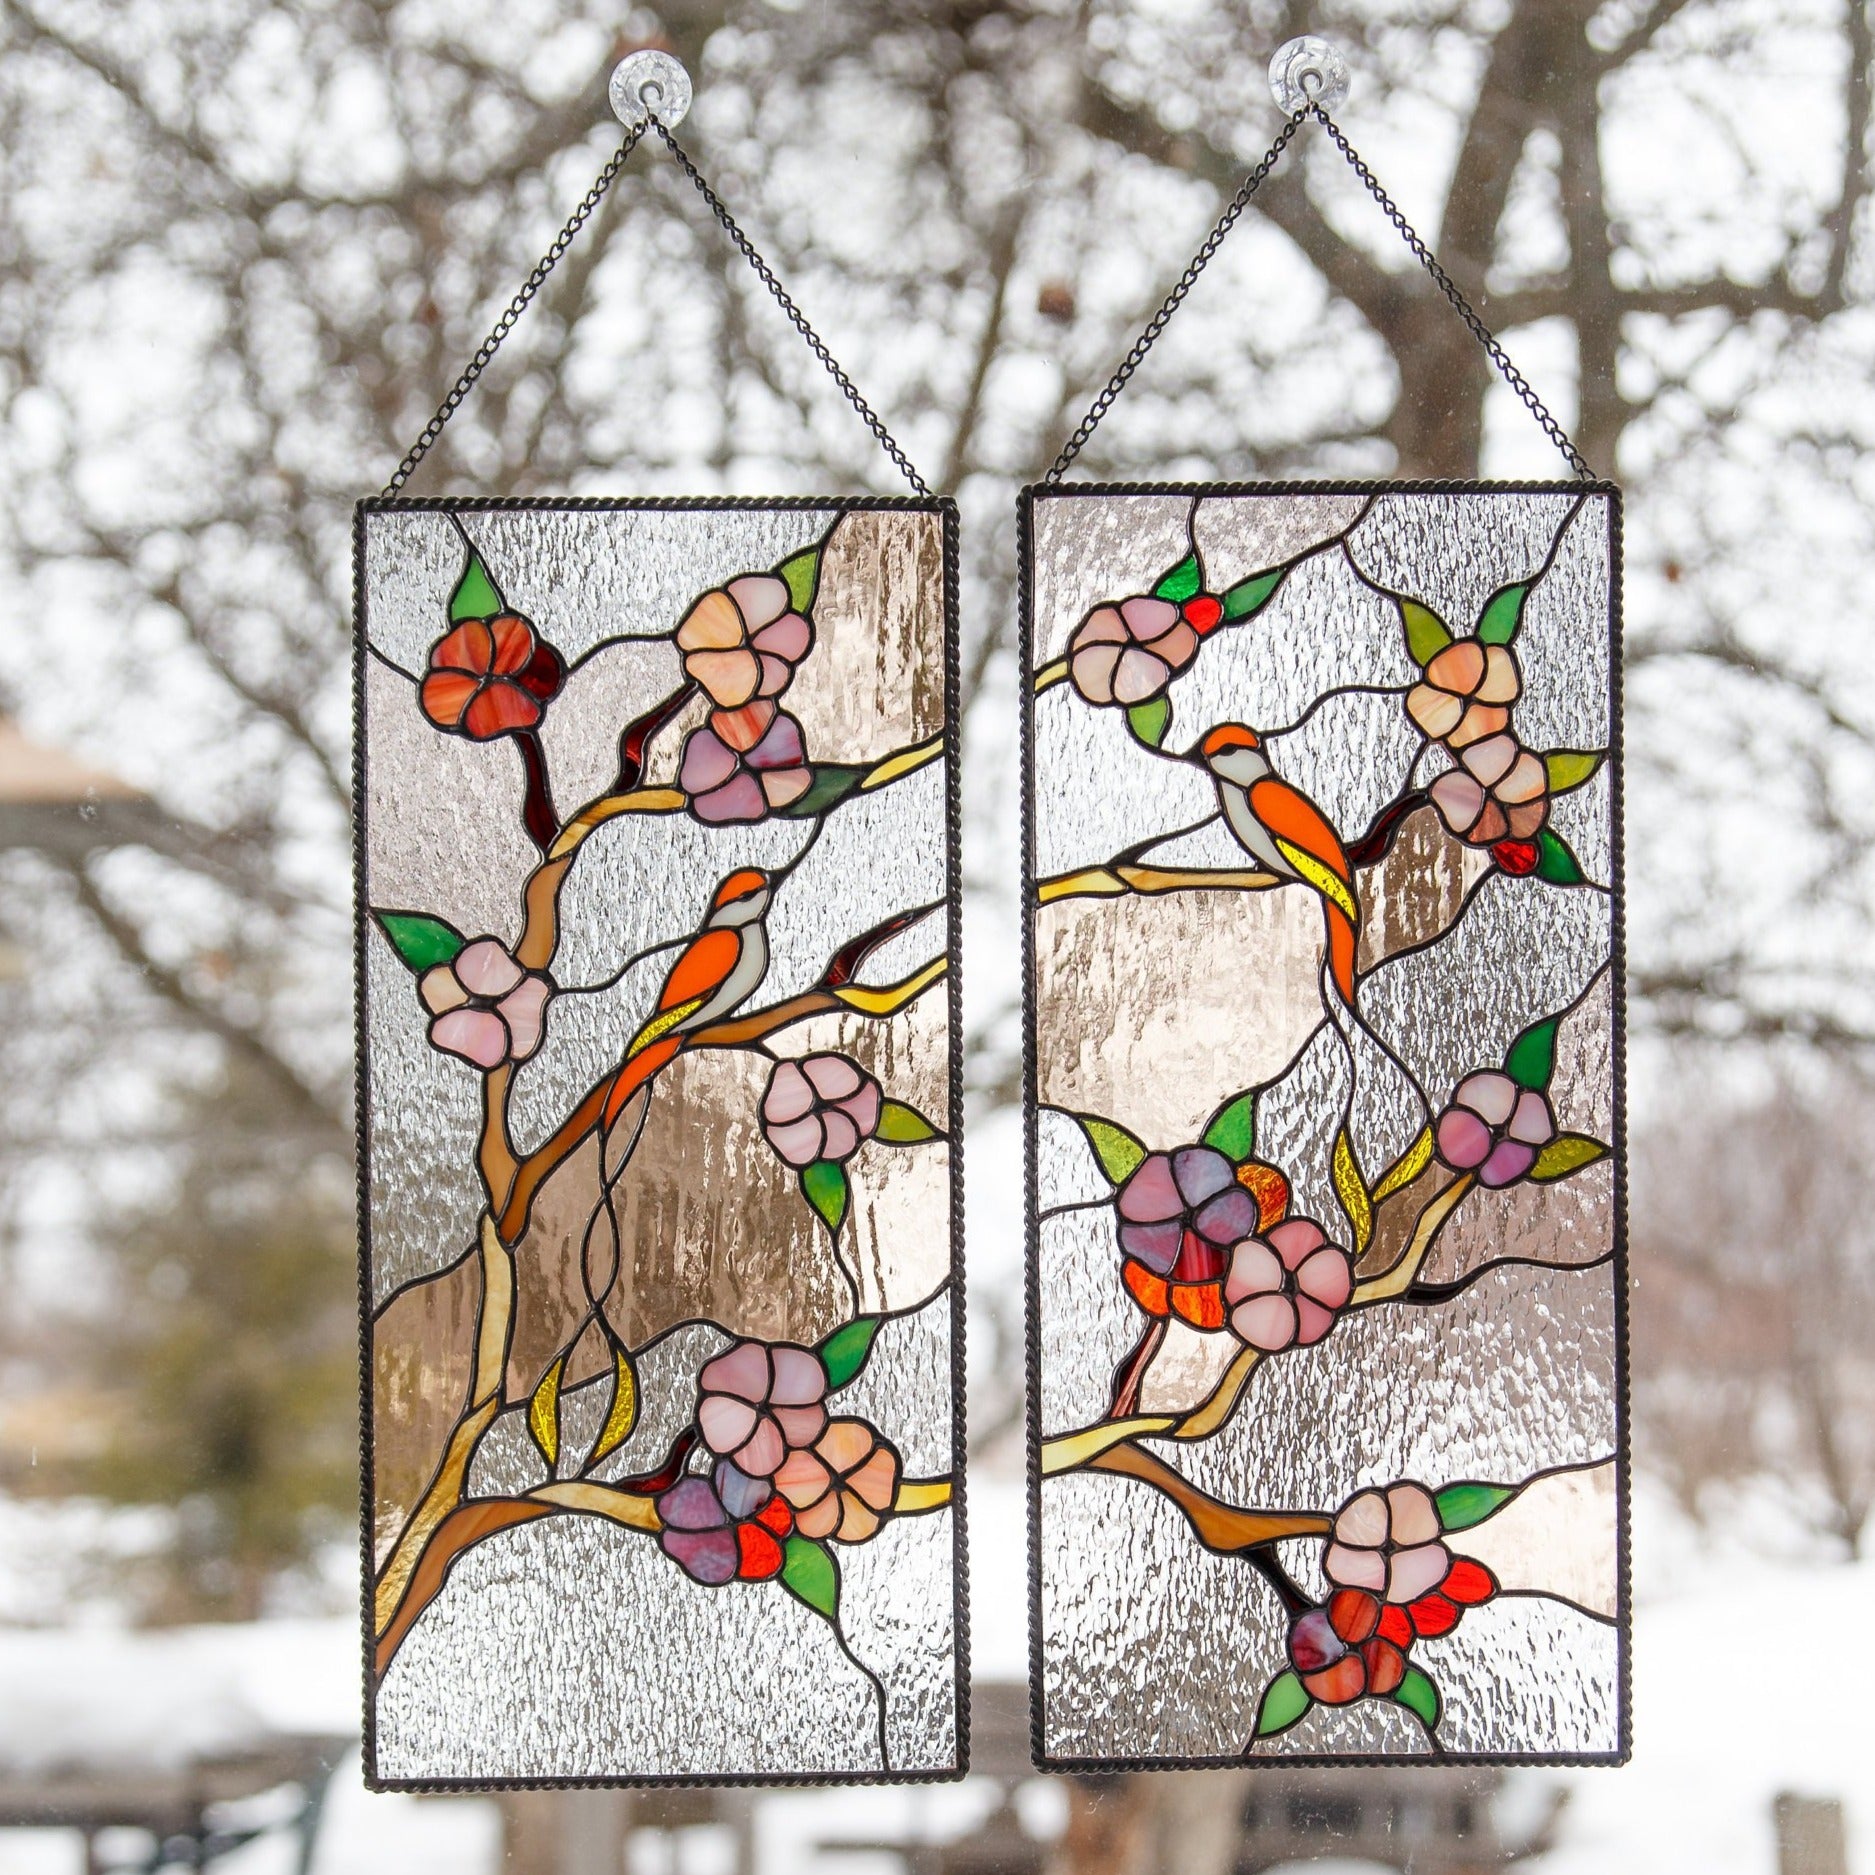 Cherry Blossom stained glass window panels – Glass Art Stories